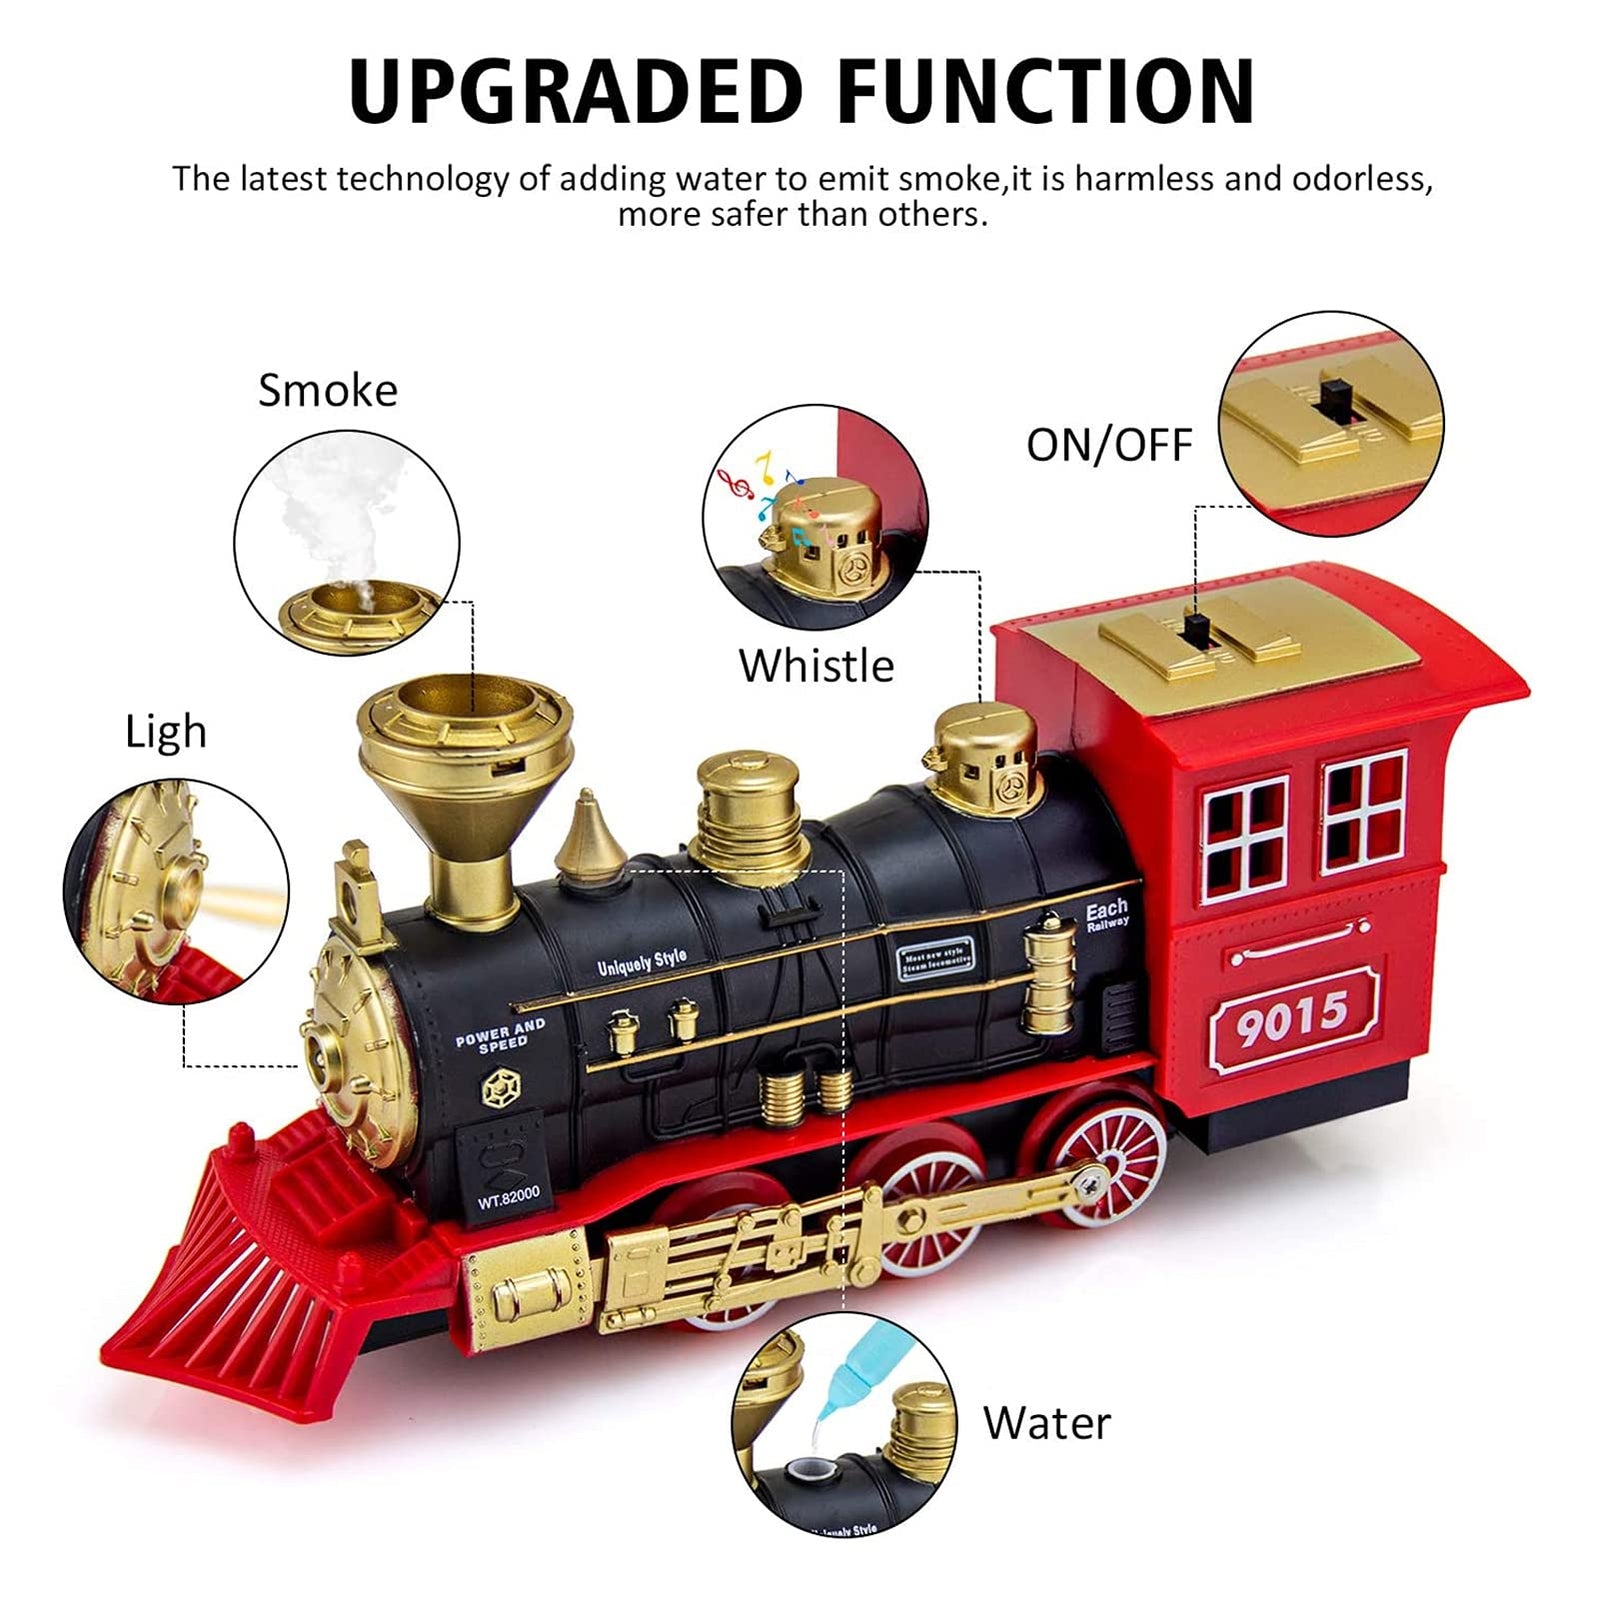 Hot Bee Train Set - Electric Train Toy for Boys Girls w/ Smokes, Lights & Sound, Railway Kits w/ Steam Locomotive Engine, Cargo Cars & Tracks, Christmas Gifts for 3 4 5 6 7 8+ year old Kids